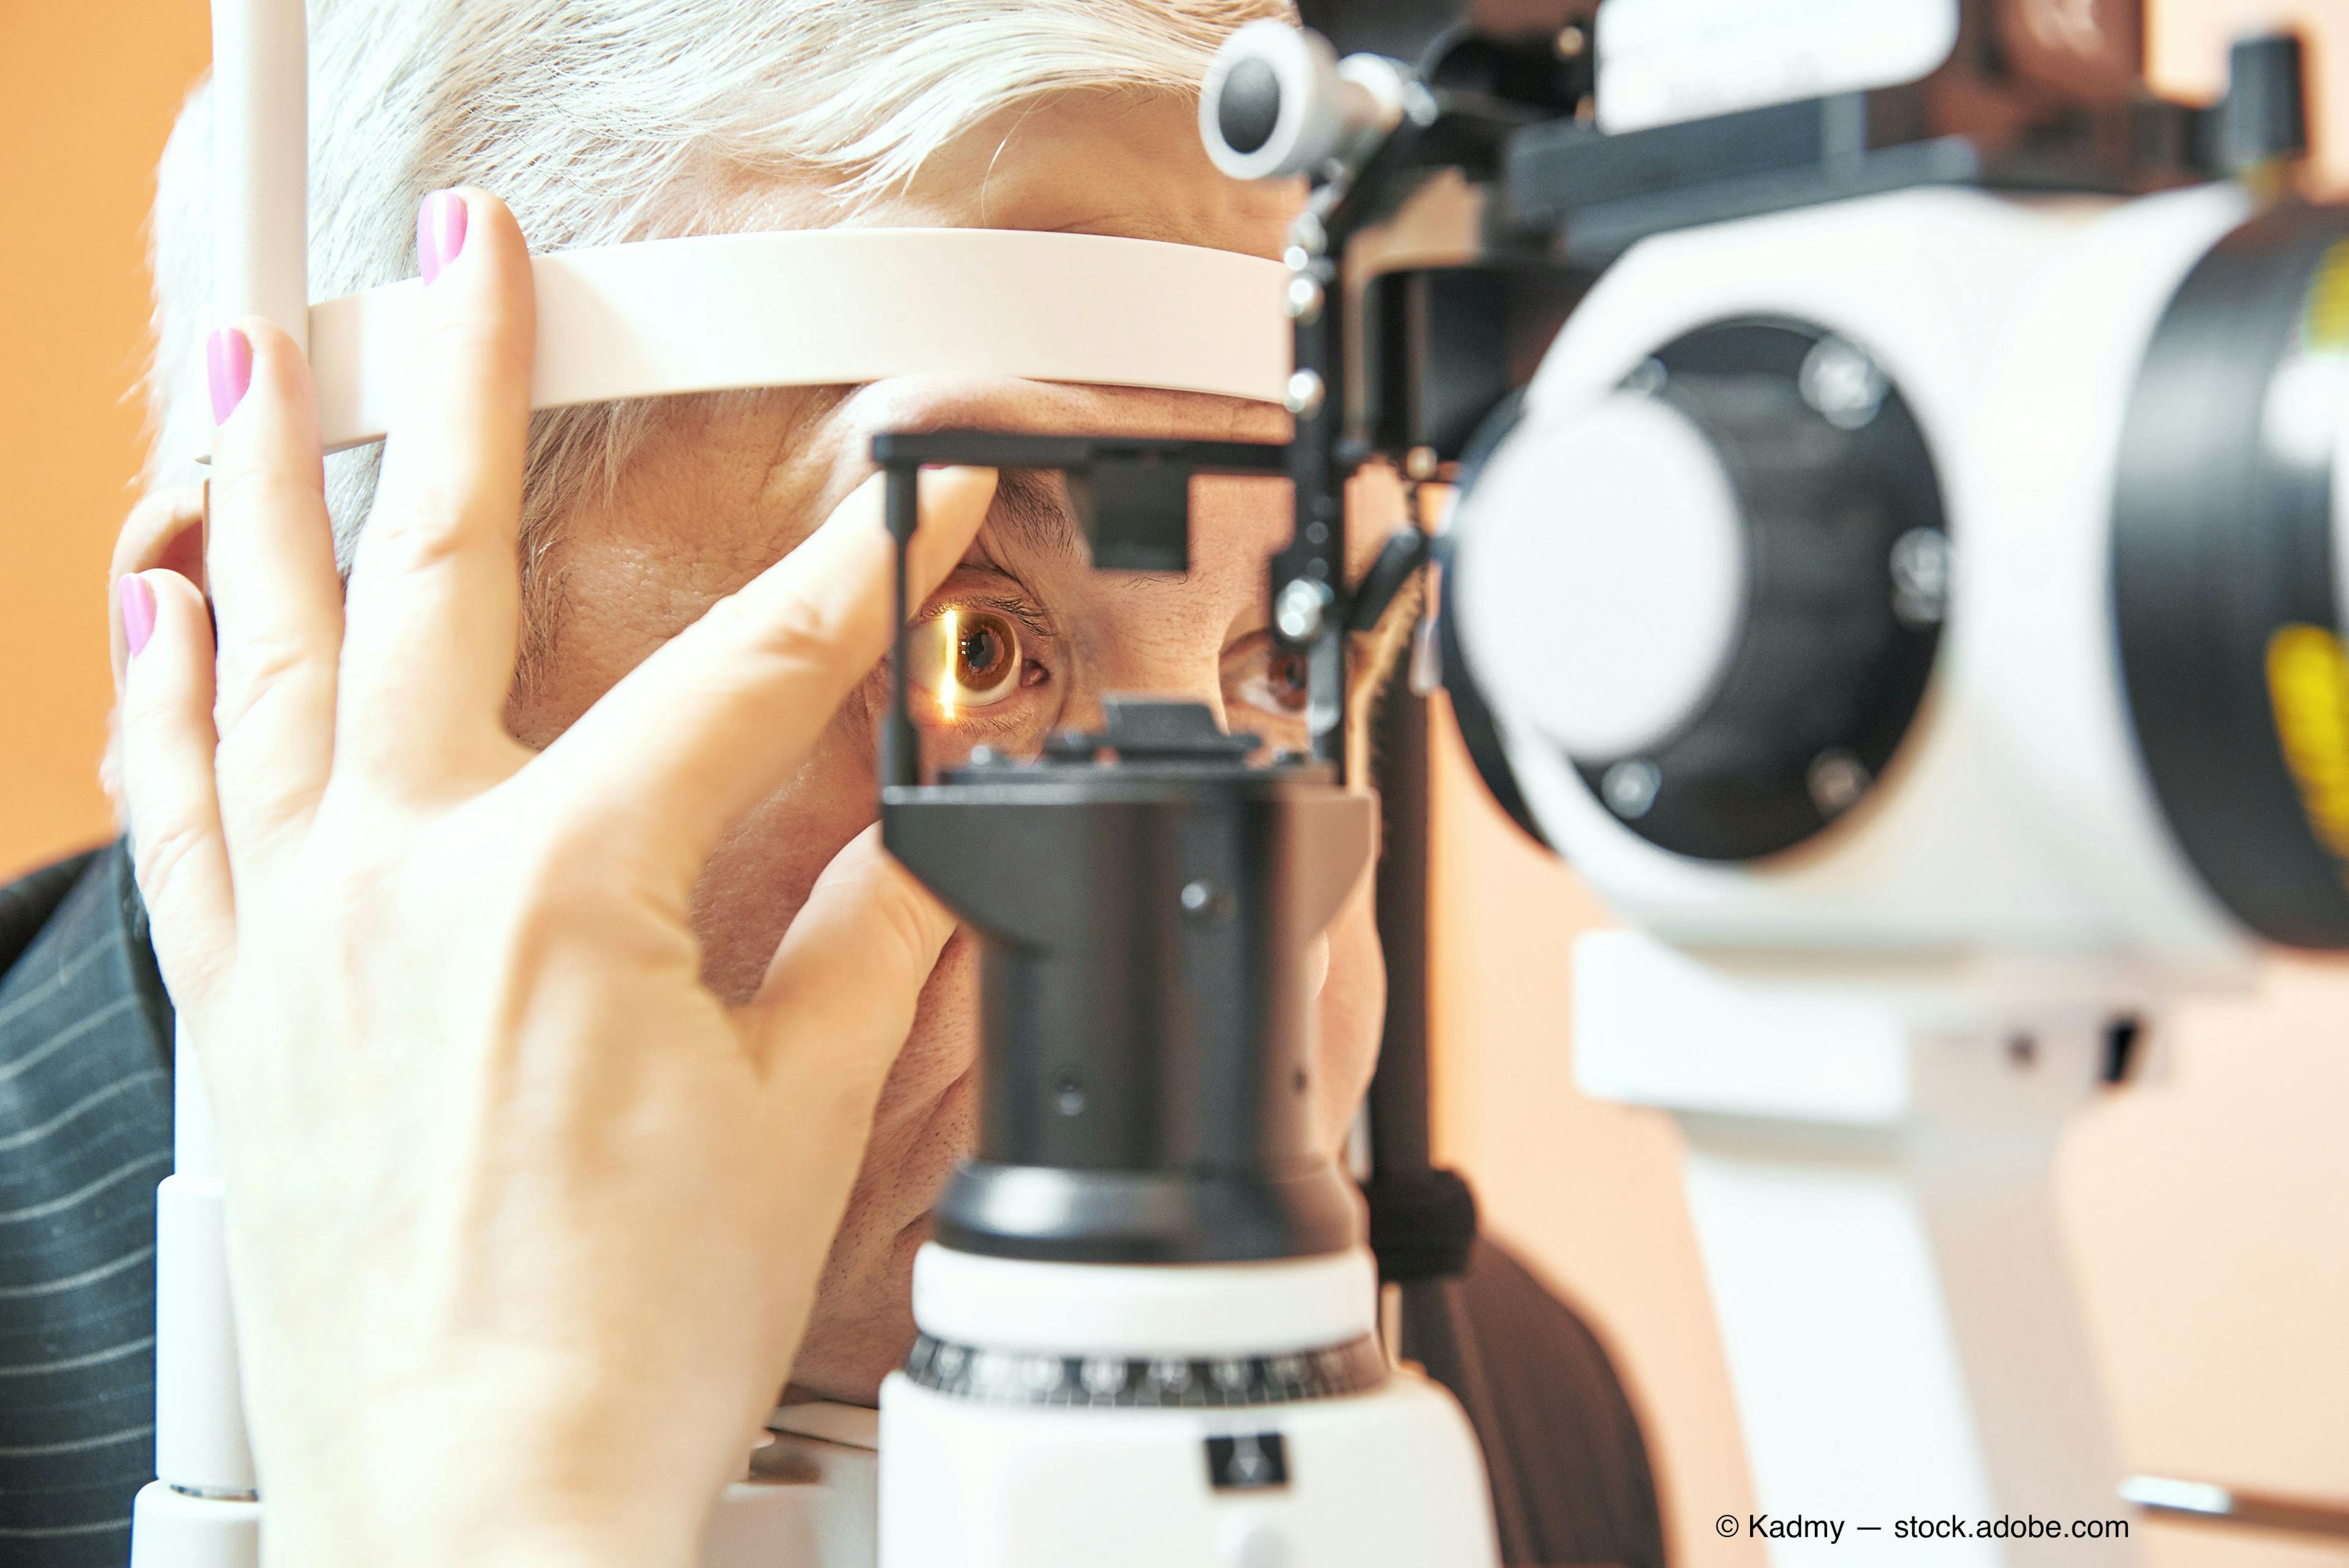 Nicox screens first patient in Whistler Phase 3b trial of NCX 470 in glaucoma